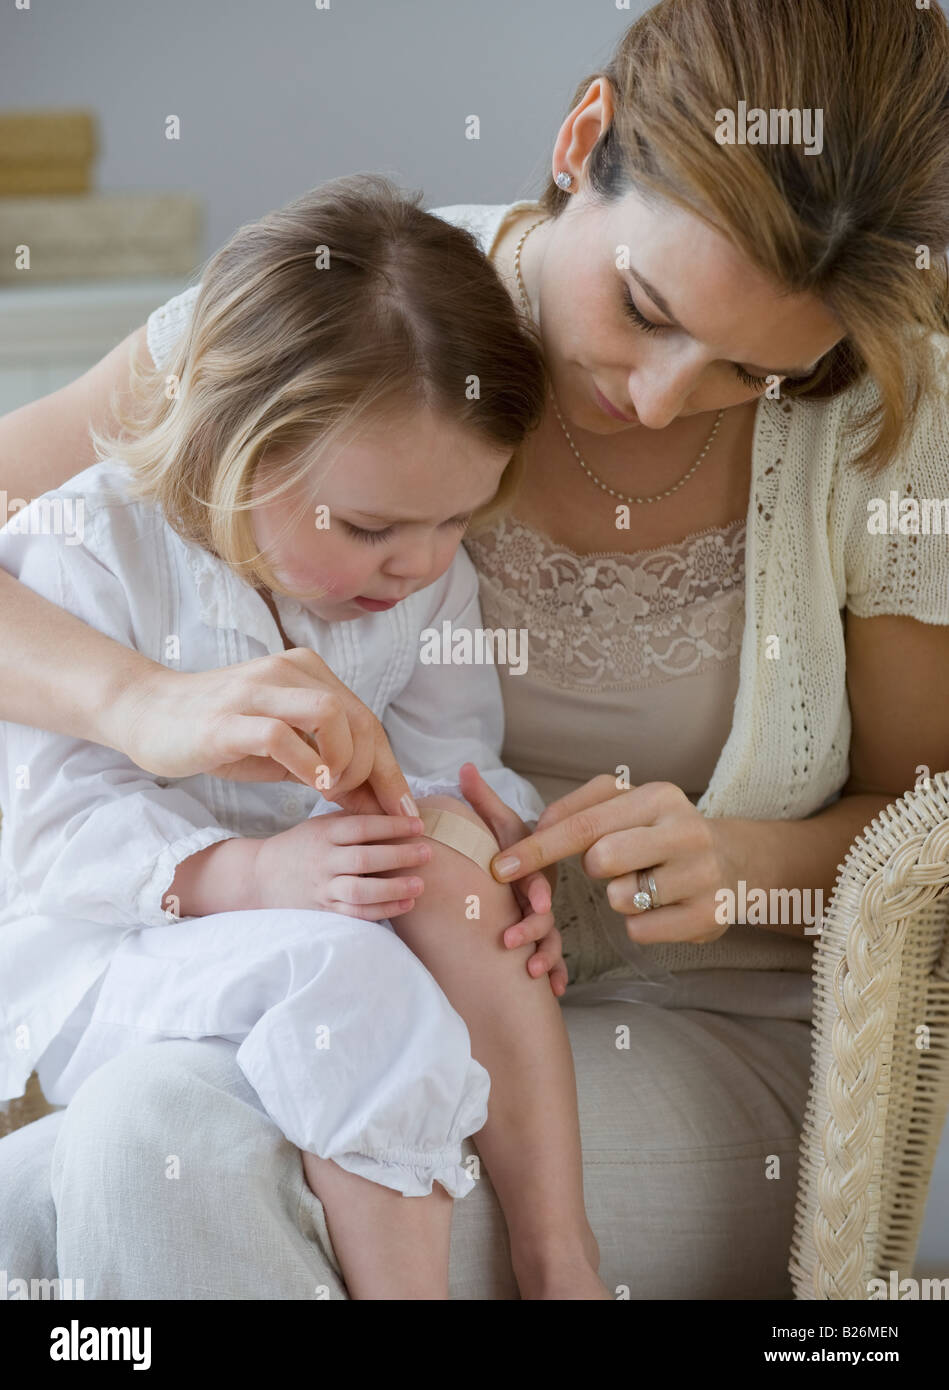 Mother putting bandage on daughter’s knee Stock Photo